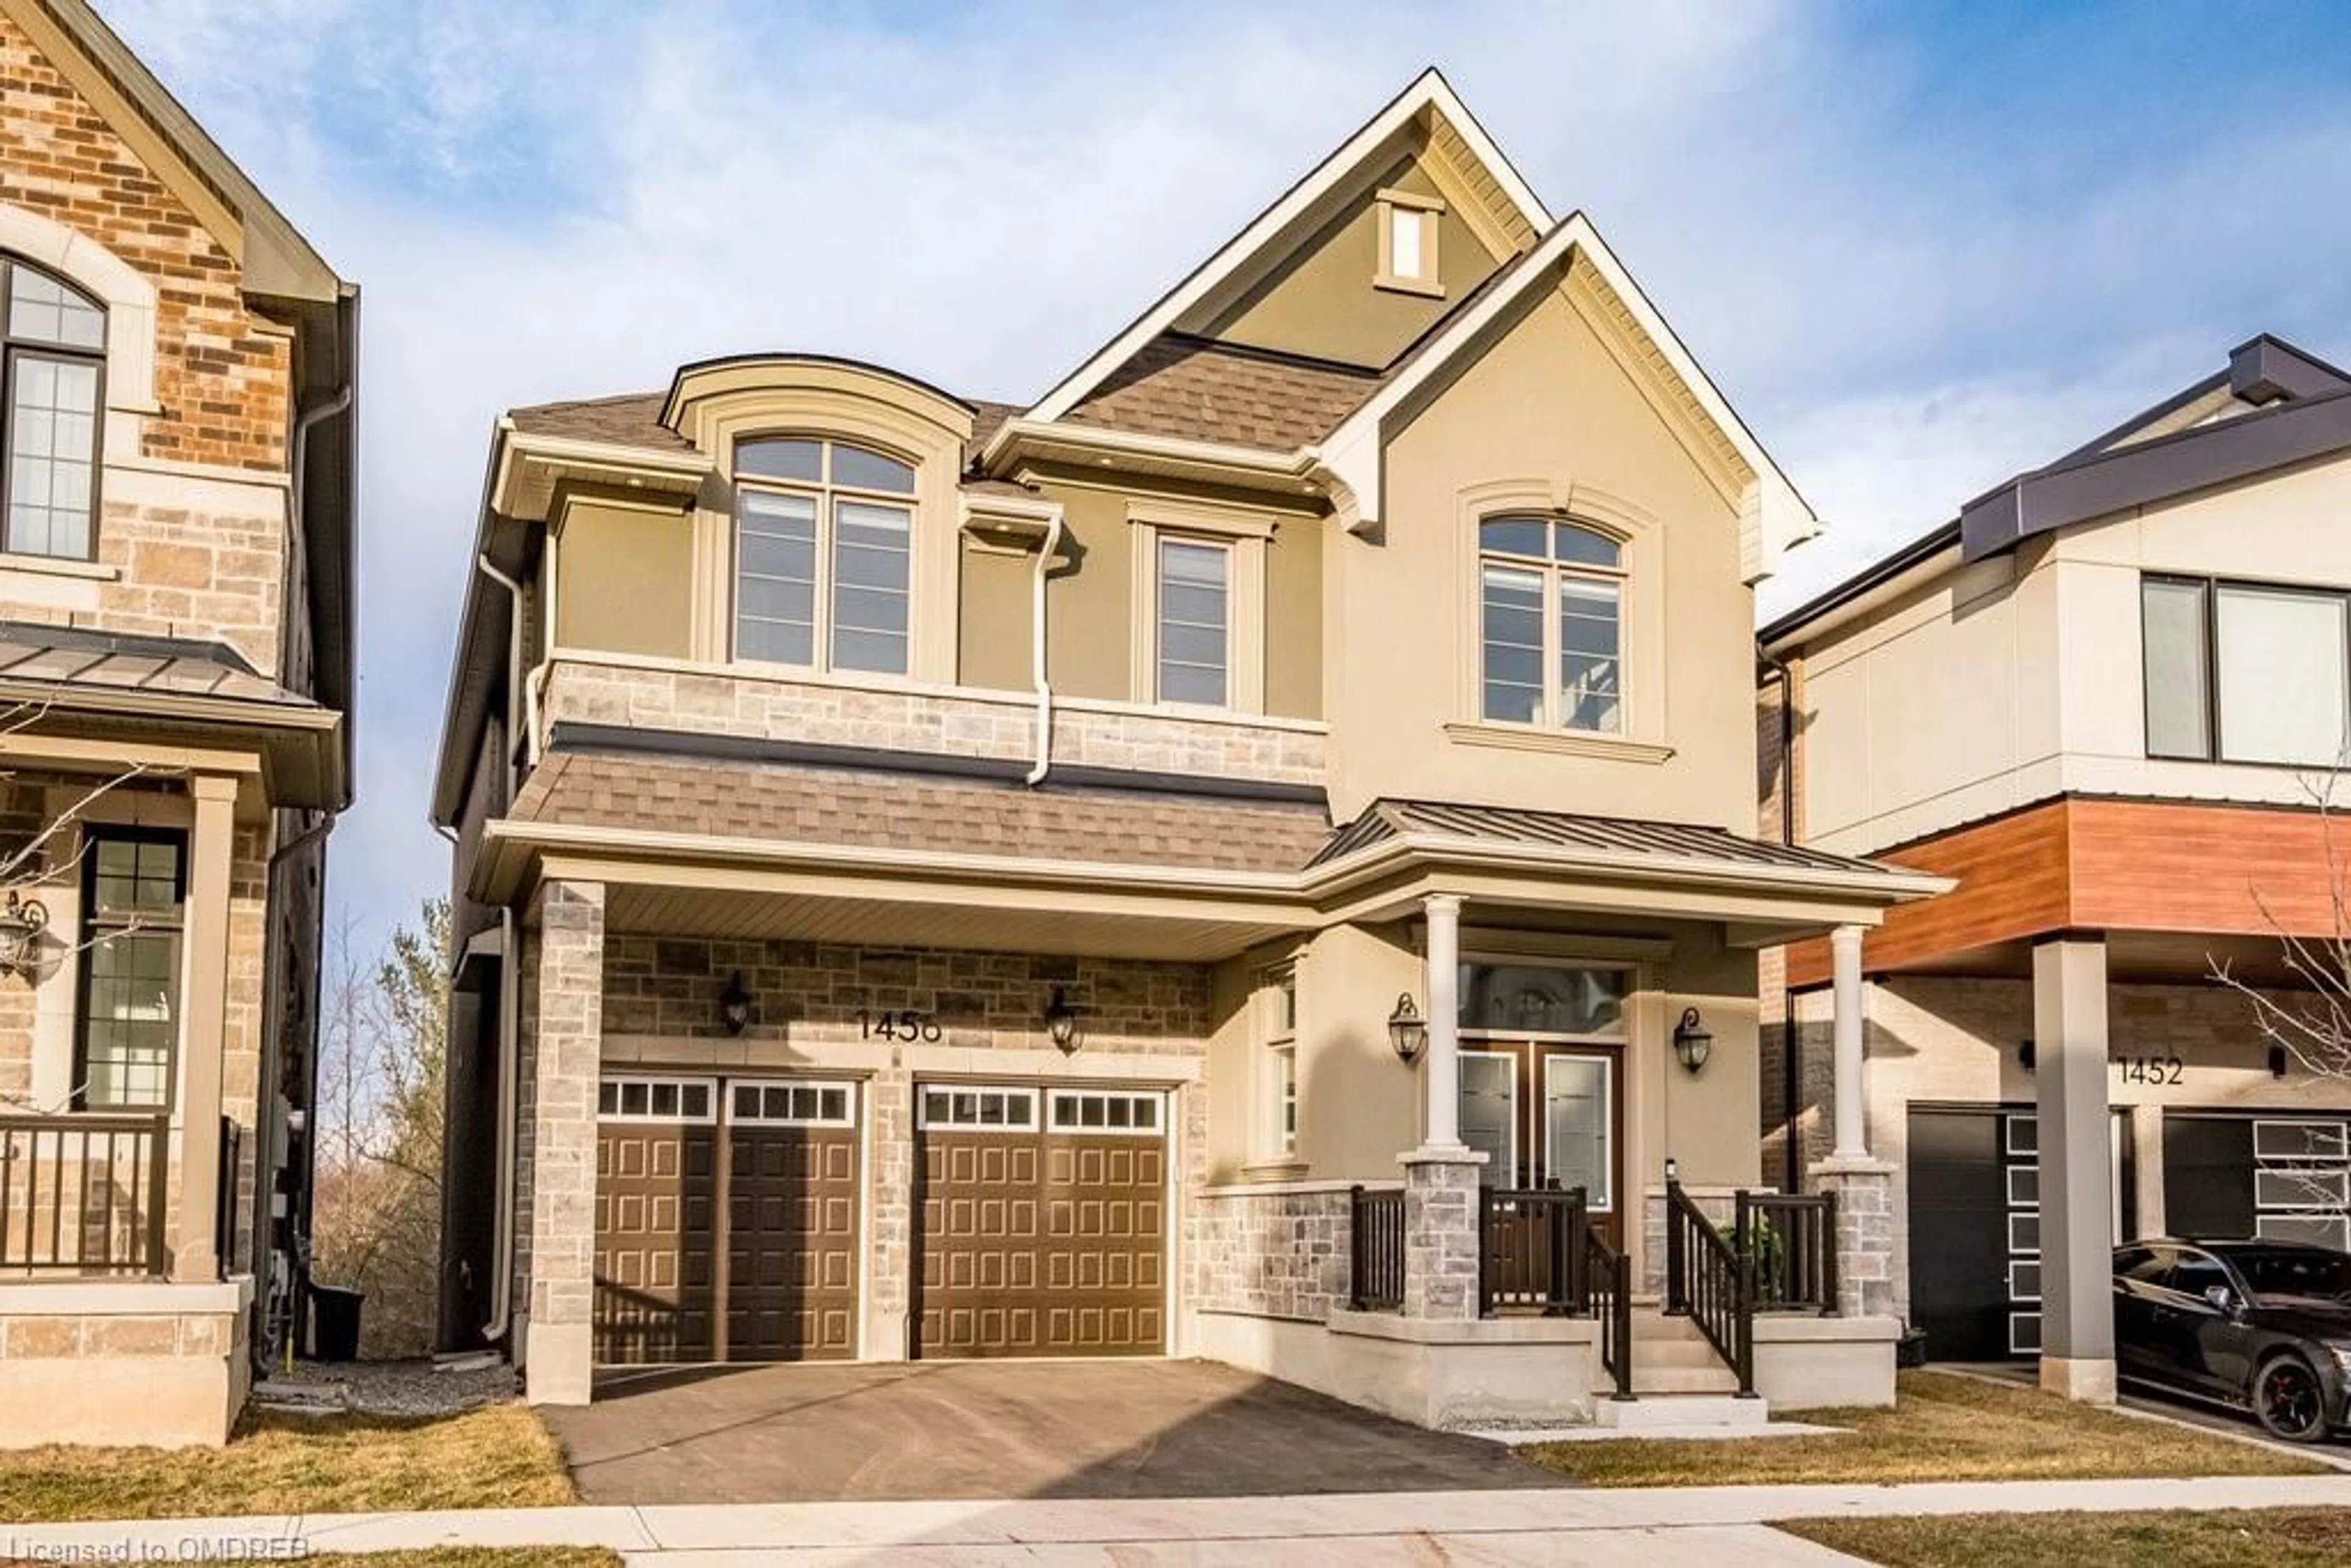 Home with brick exterior material for 1456 Ford Strathy Crescent, Oakville Ontario L6H 3W9